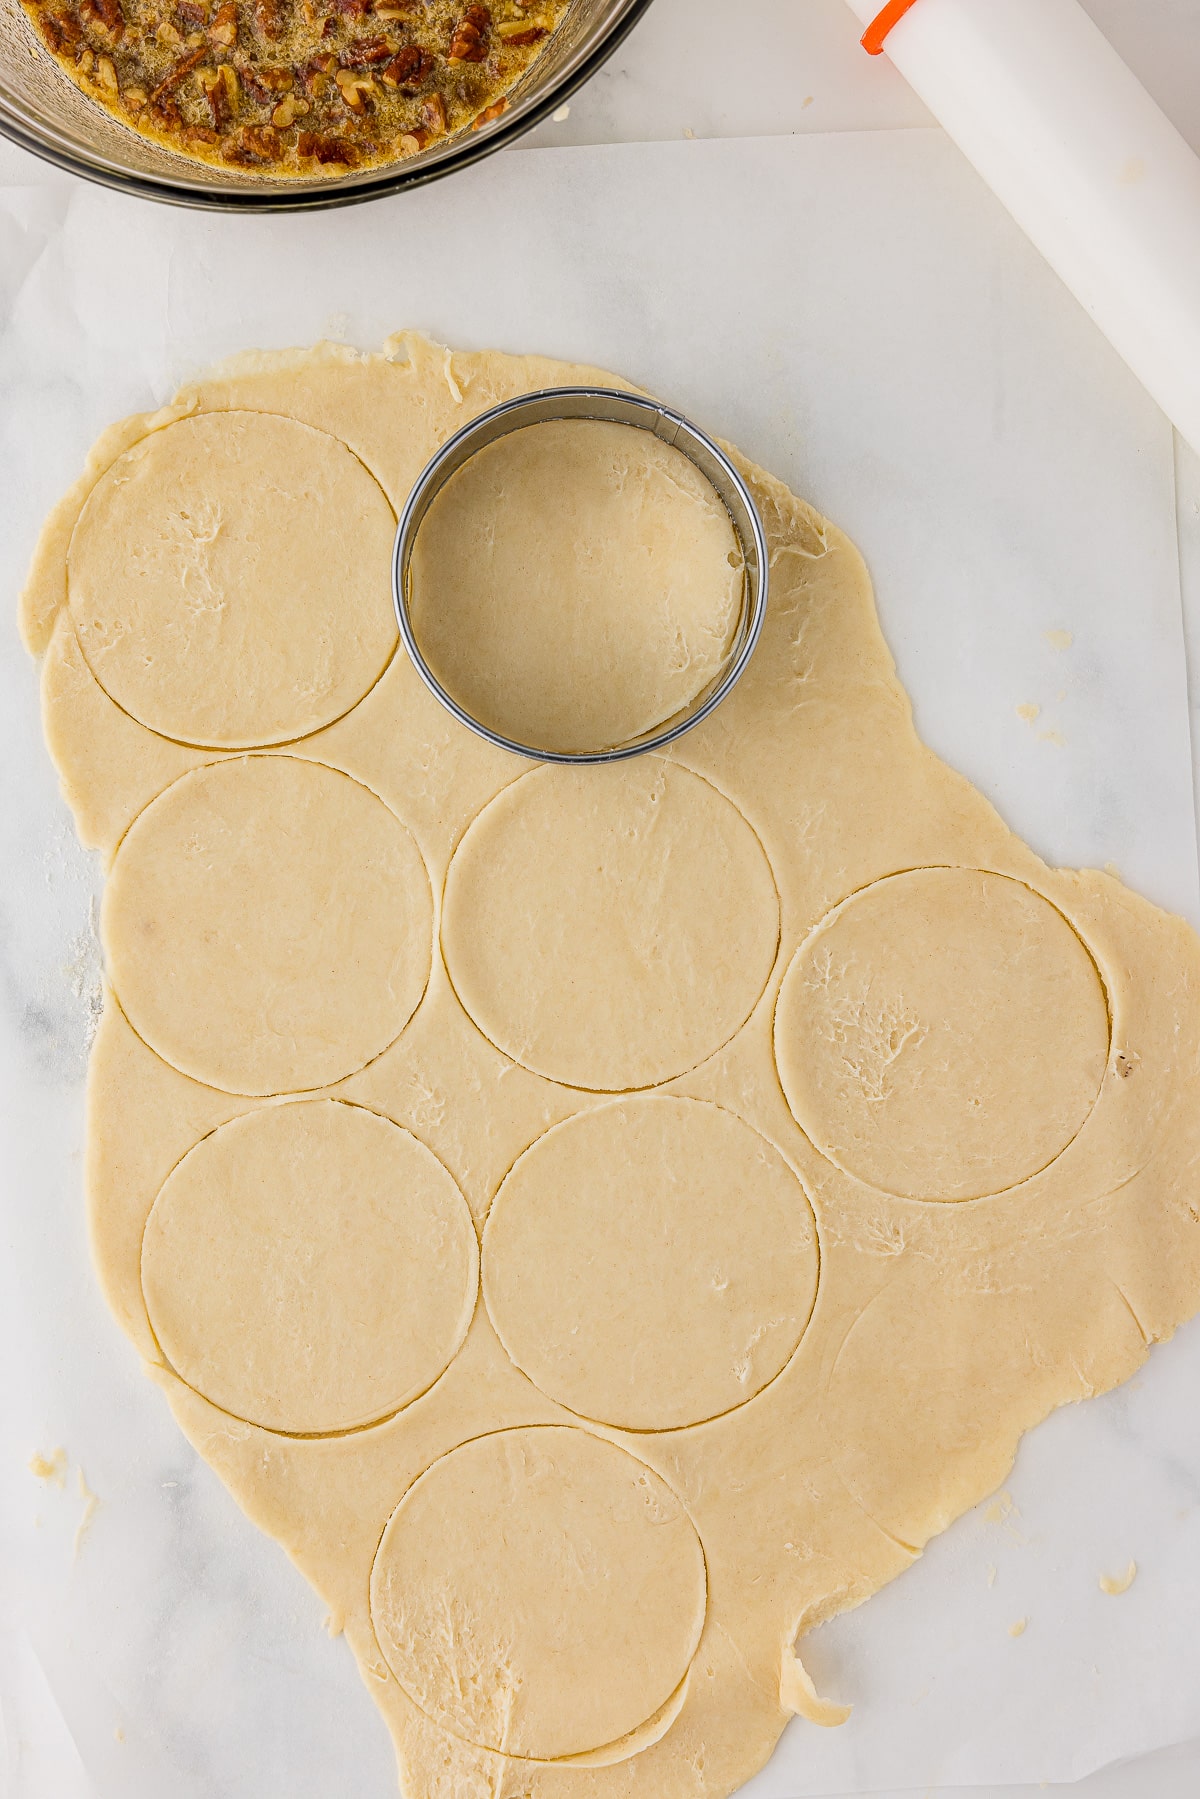 Round cookie cutter cutting dough into circles. 